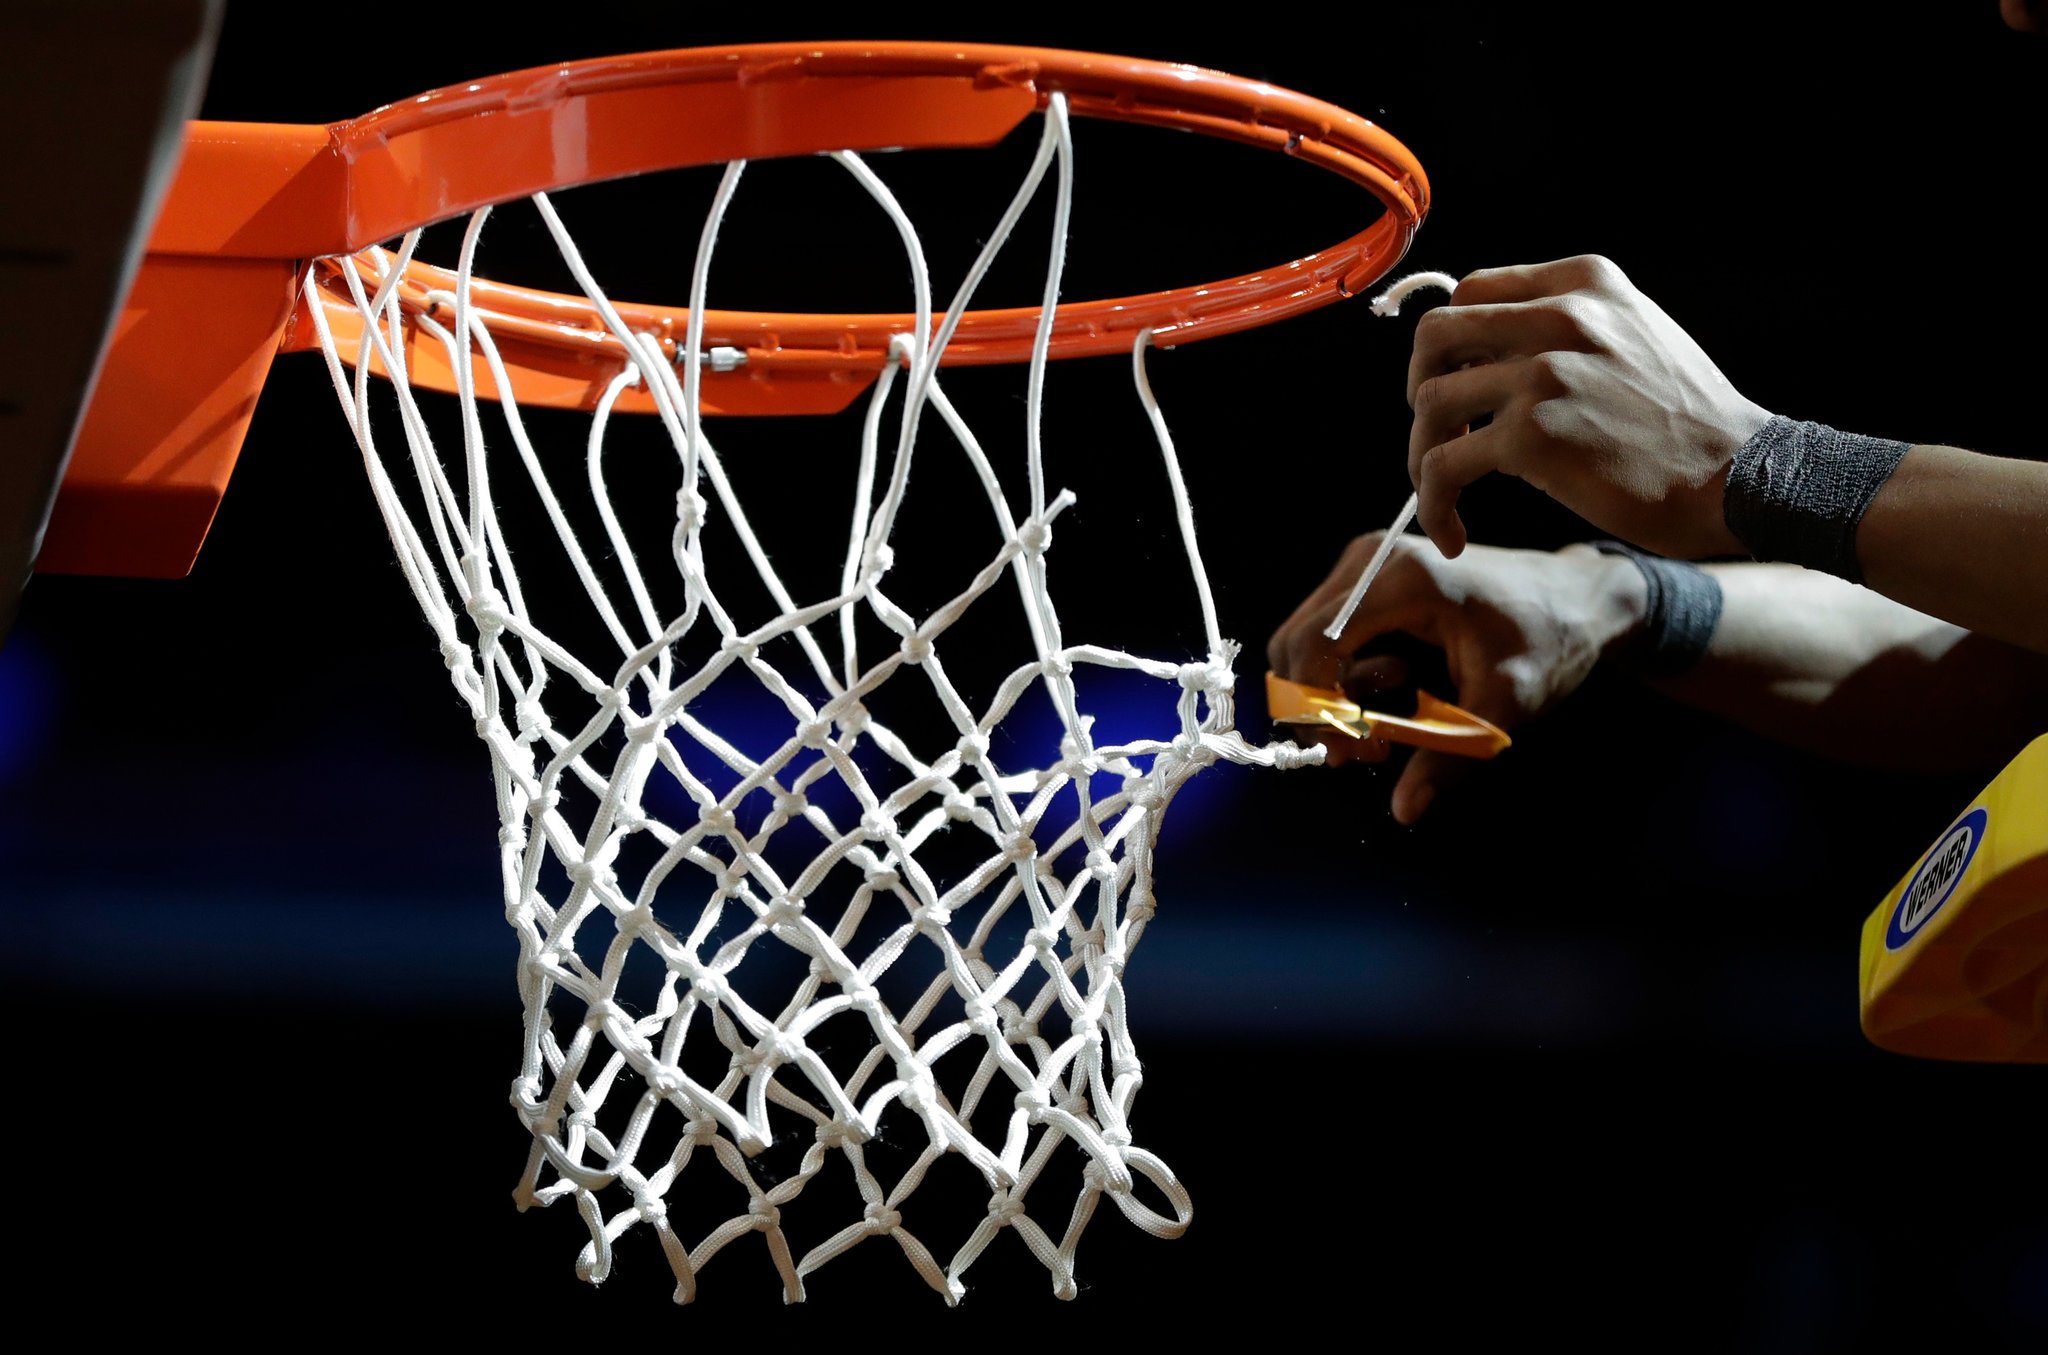 Valuable lessons businesses can learn from March Madness